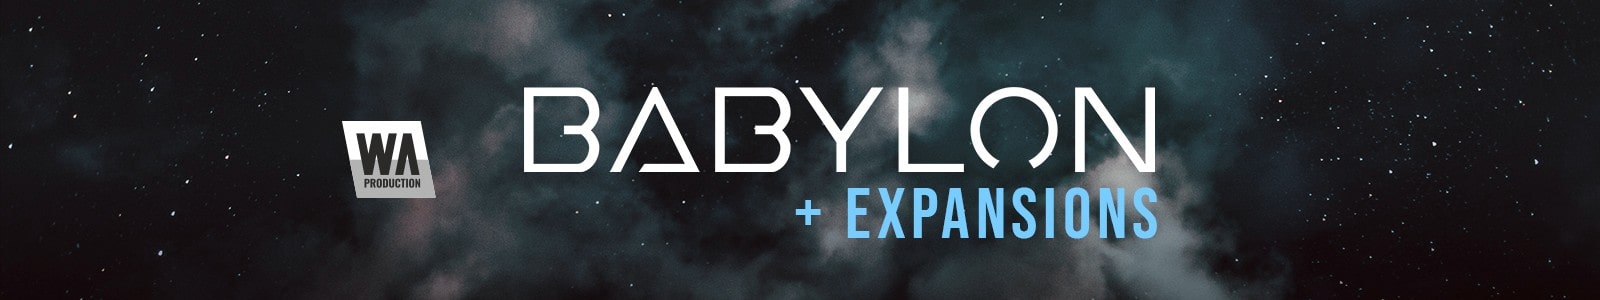 WA Produciton Babylon Synth + All 20 Expansions